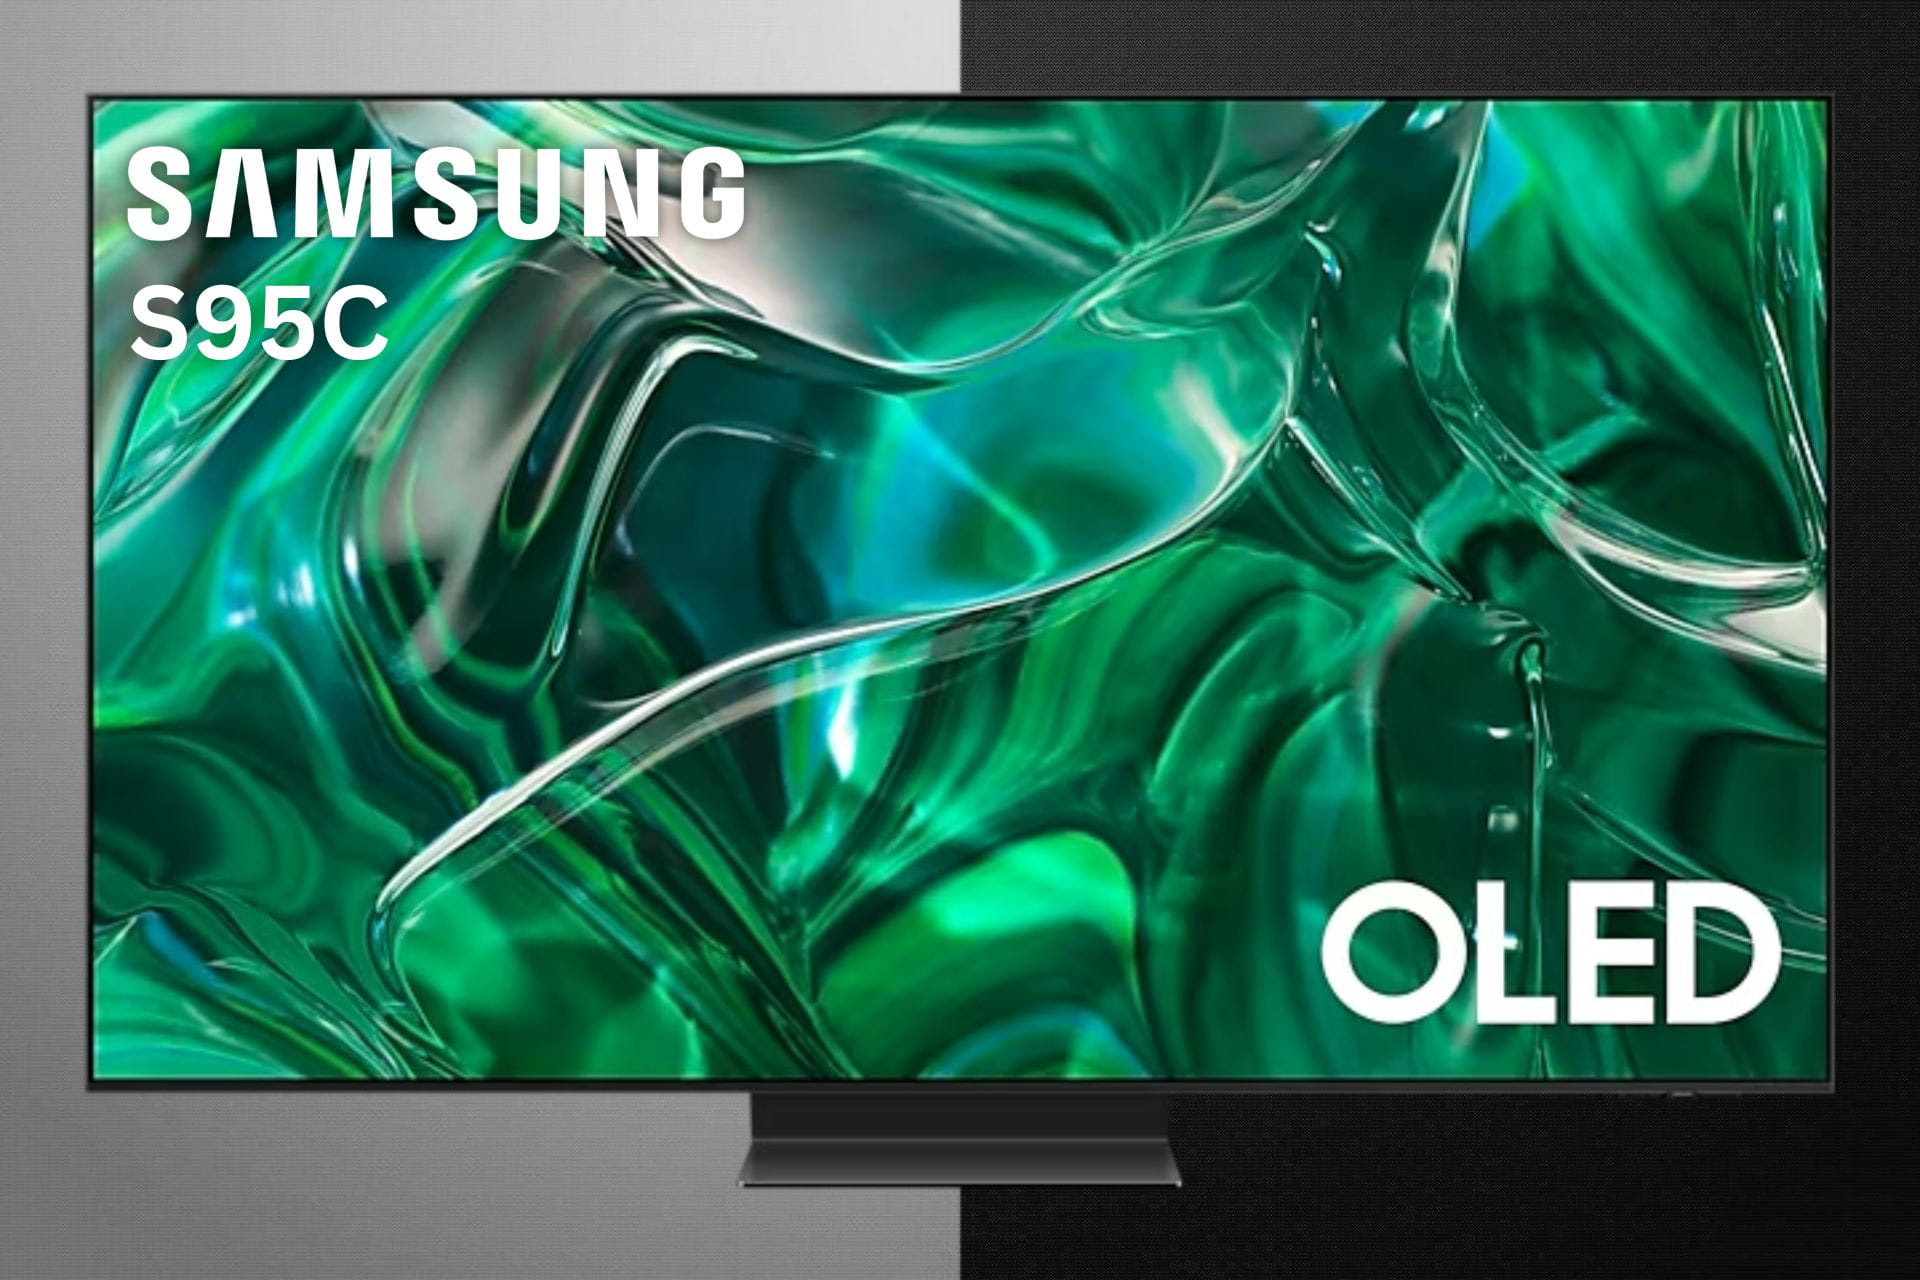 Samsung TV S95C featuring the OLED technology